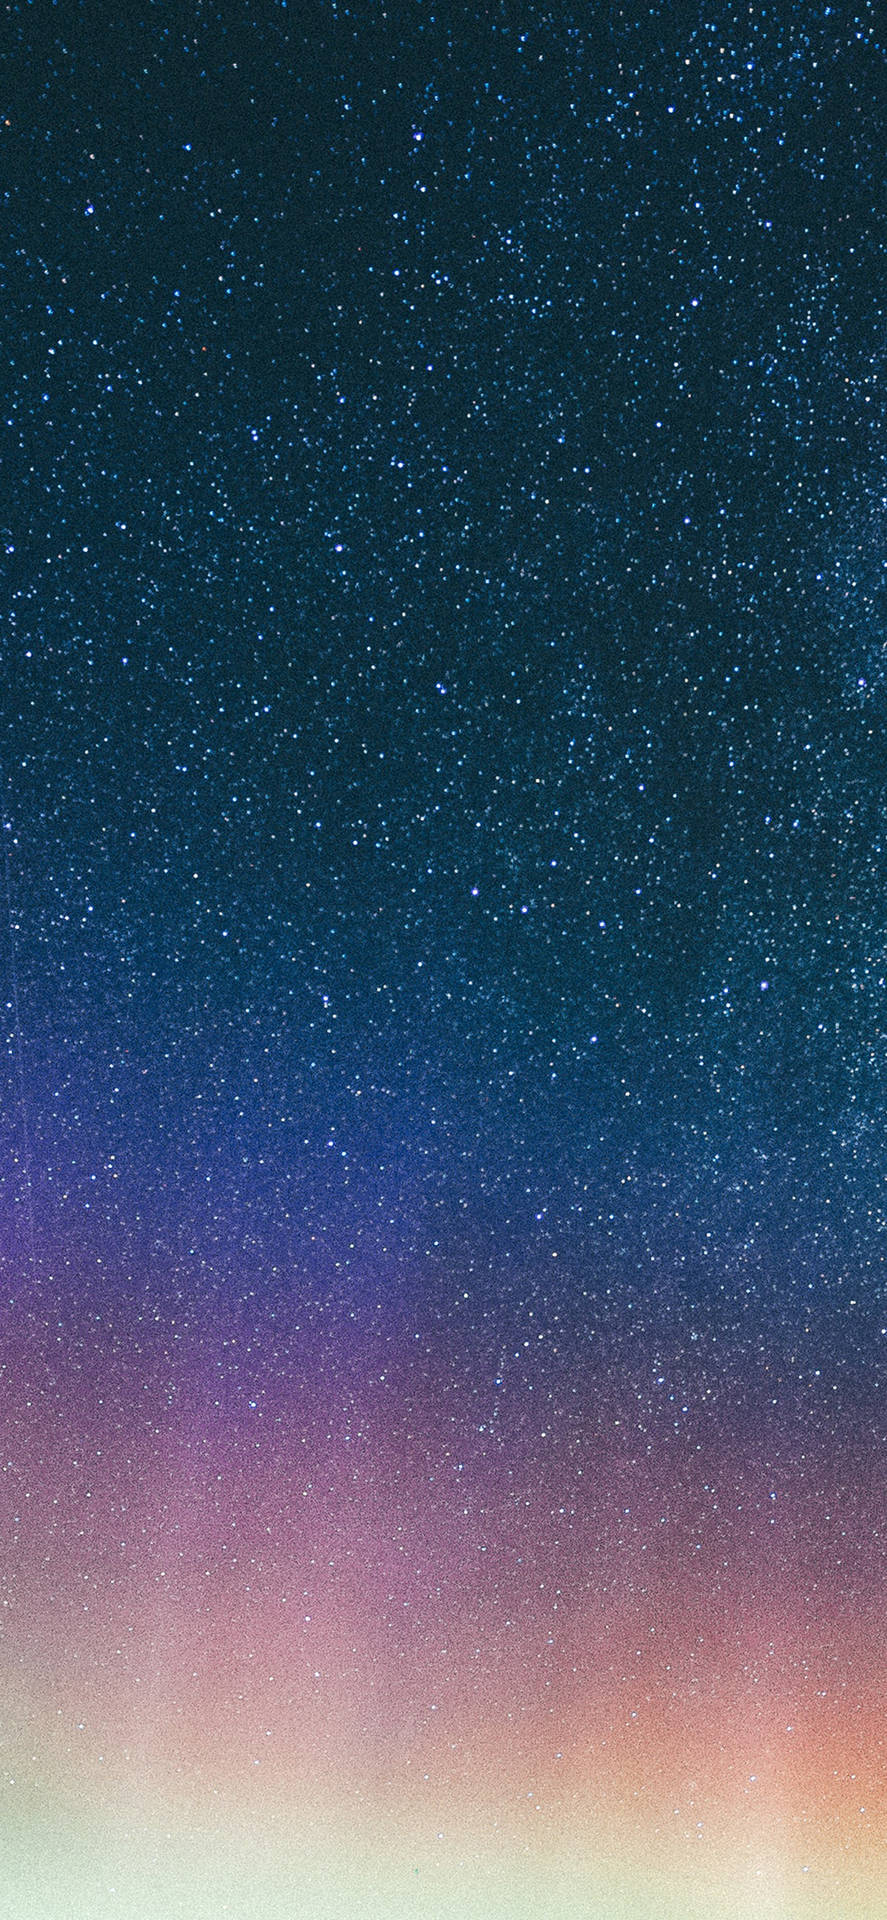 Galaxy Image For Iphone Se 2020 Wallpaper